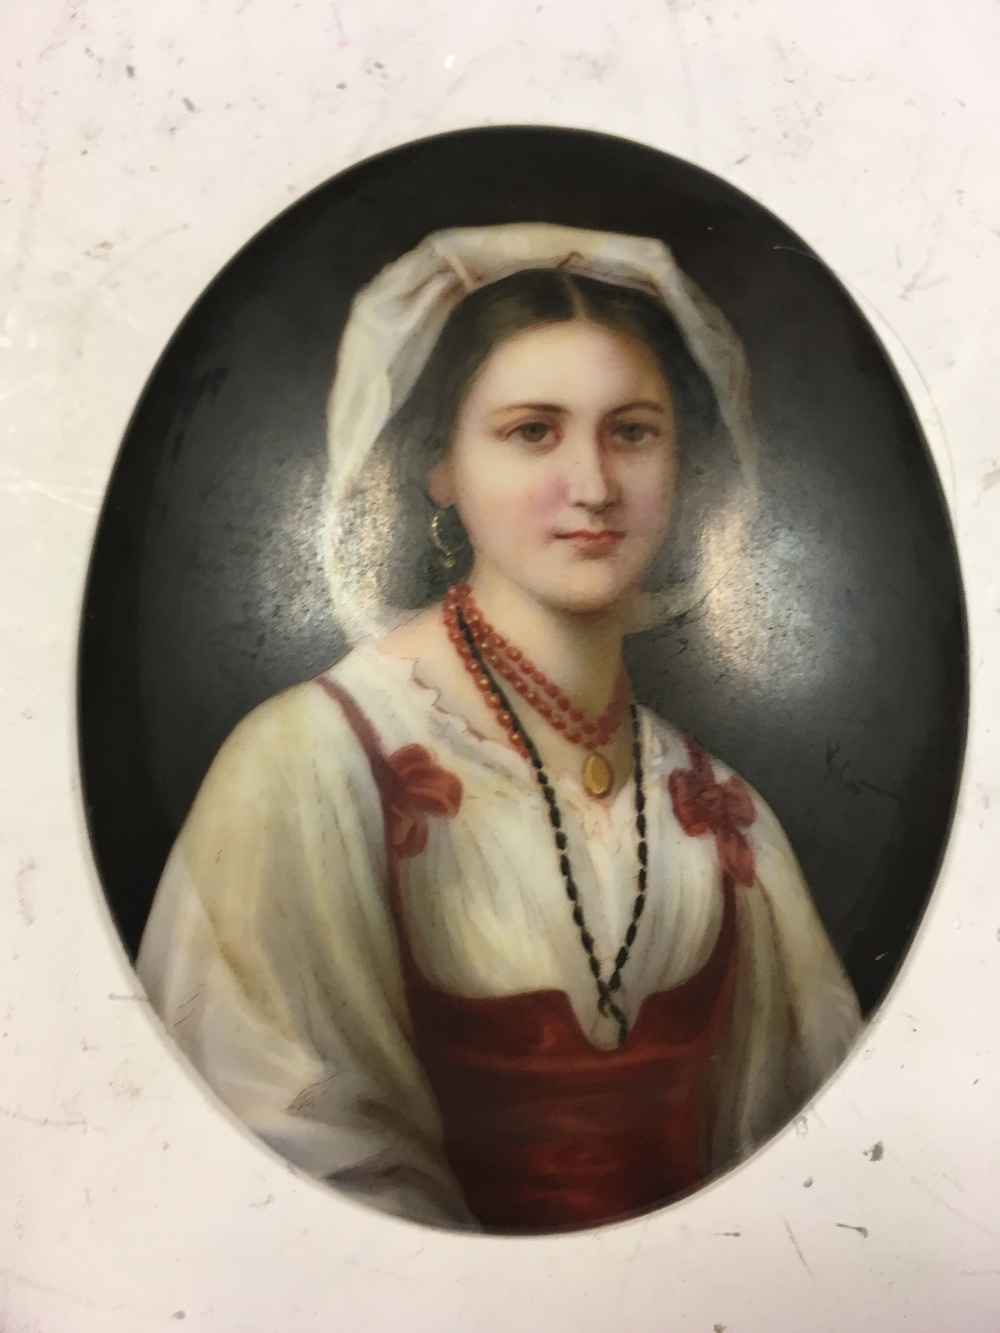 Two 19th century porcelain oval portrait plaques, one painted with a noblewoman with jewelled - Image 4 of 5